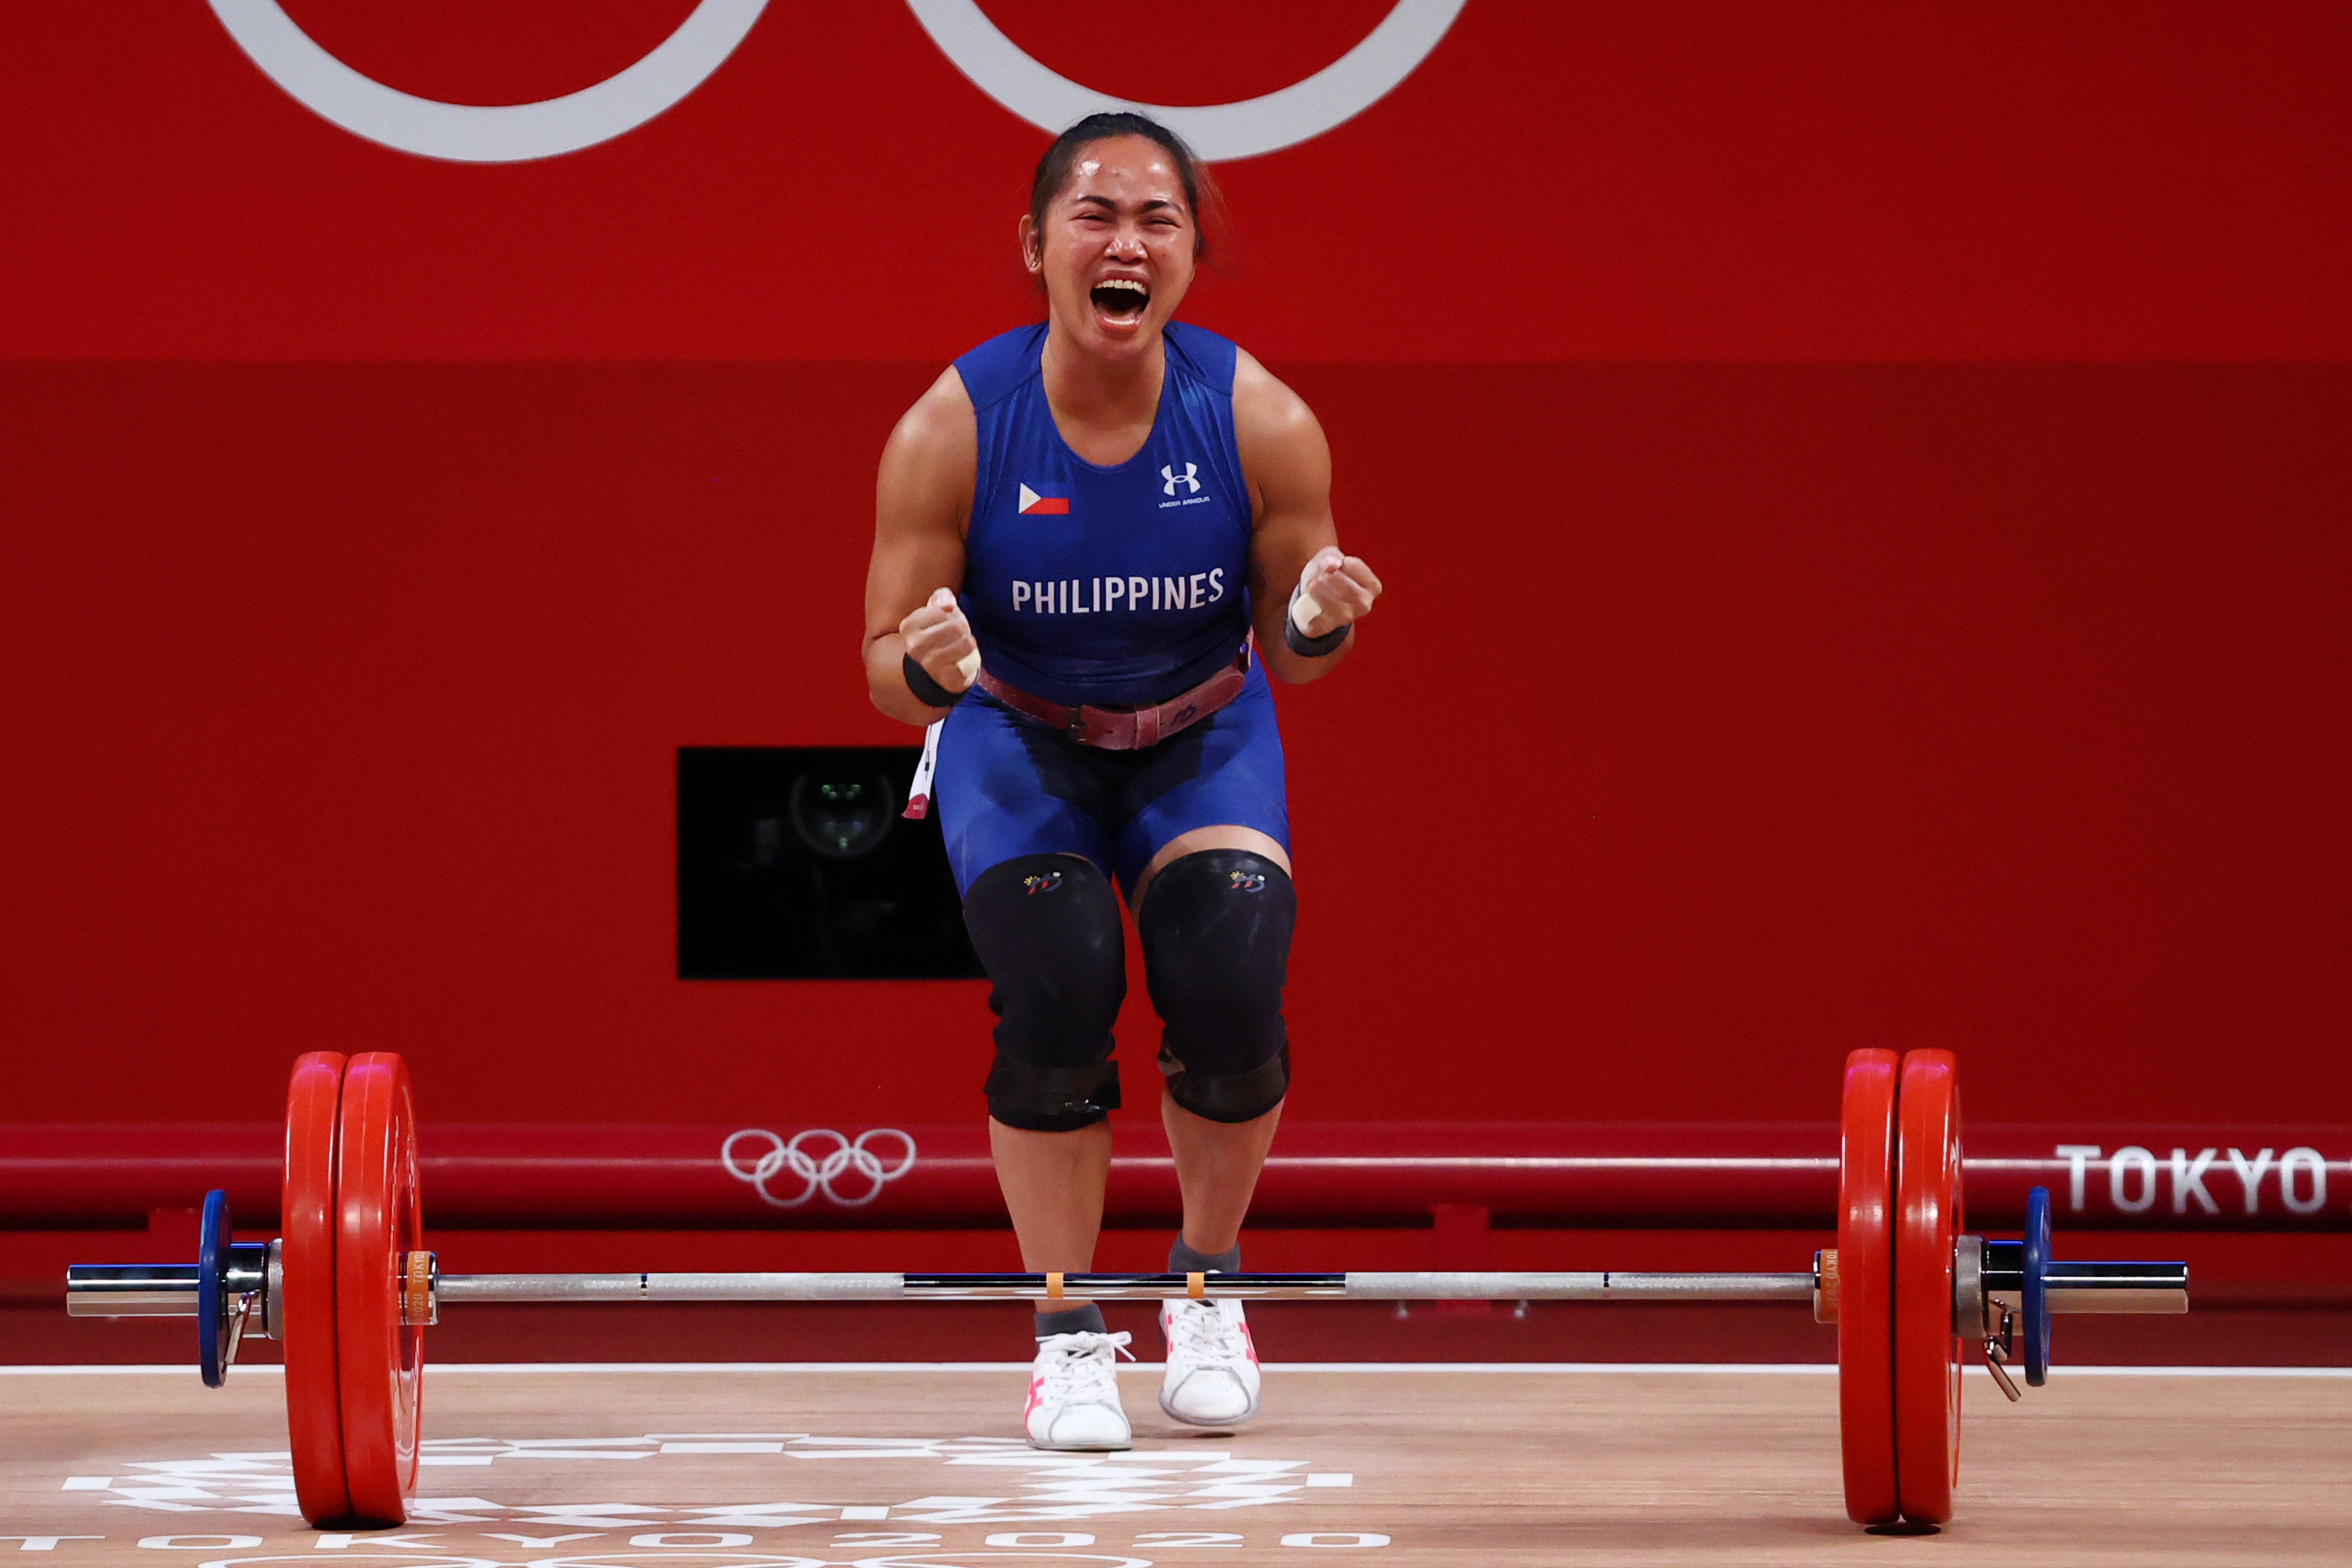 Hidilyn Diaz of the Philippines celebrates after a lift at the Tokyo Olympics in 2021. Photo: Reuters